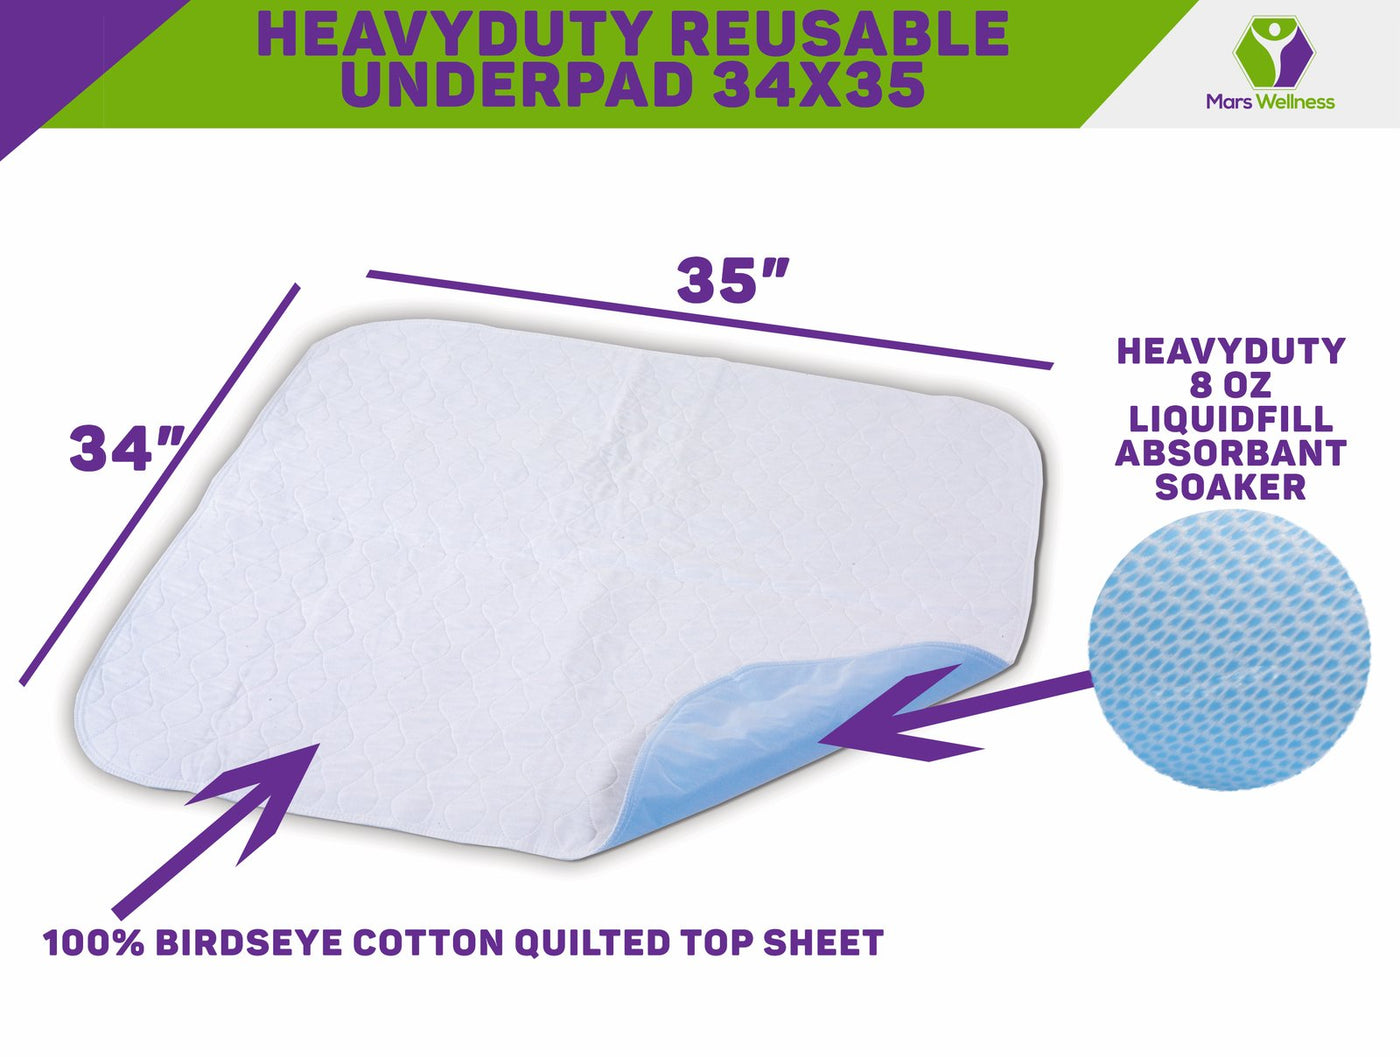 New Inspire Washable and Reusable Incontinence Bed Pads